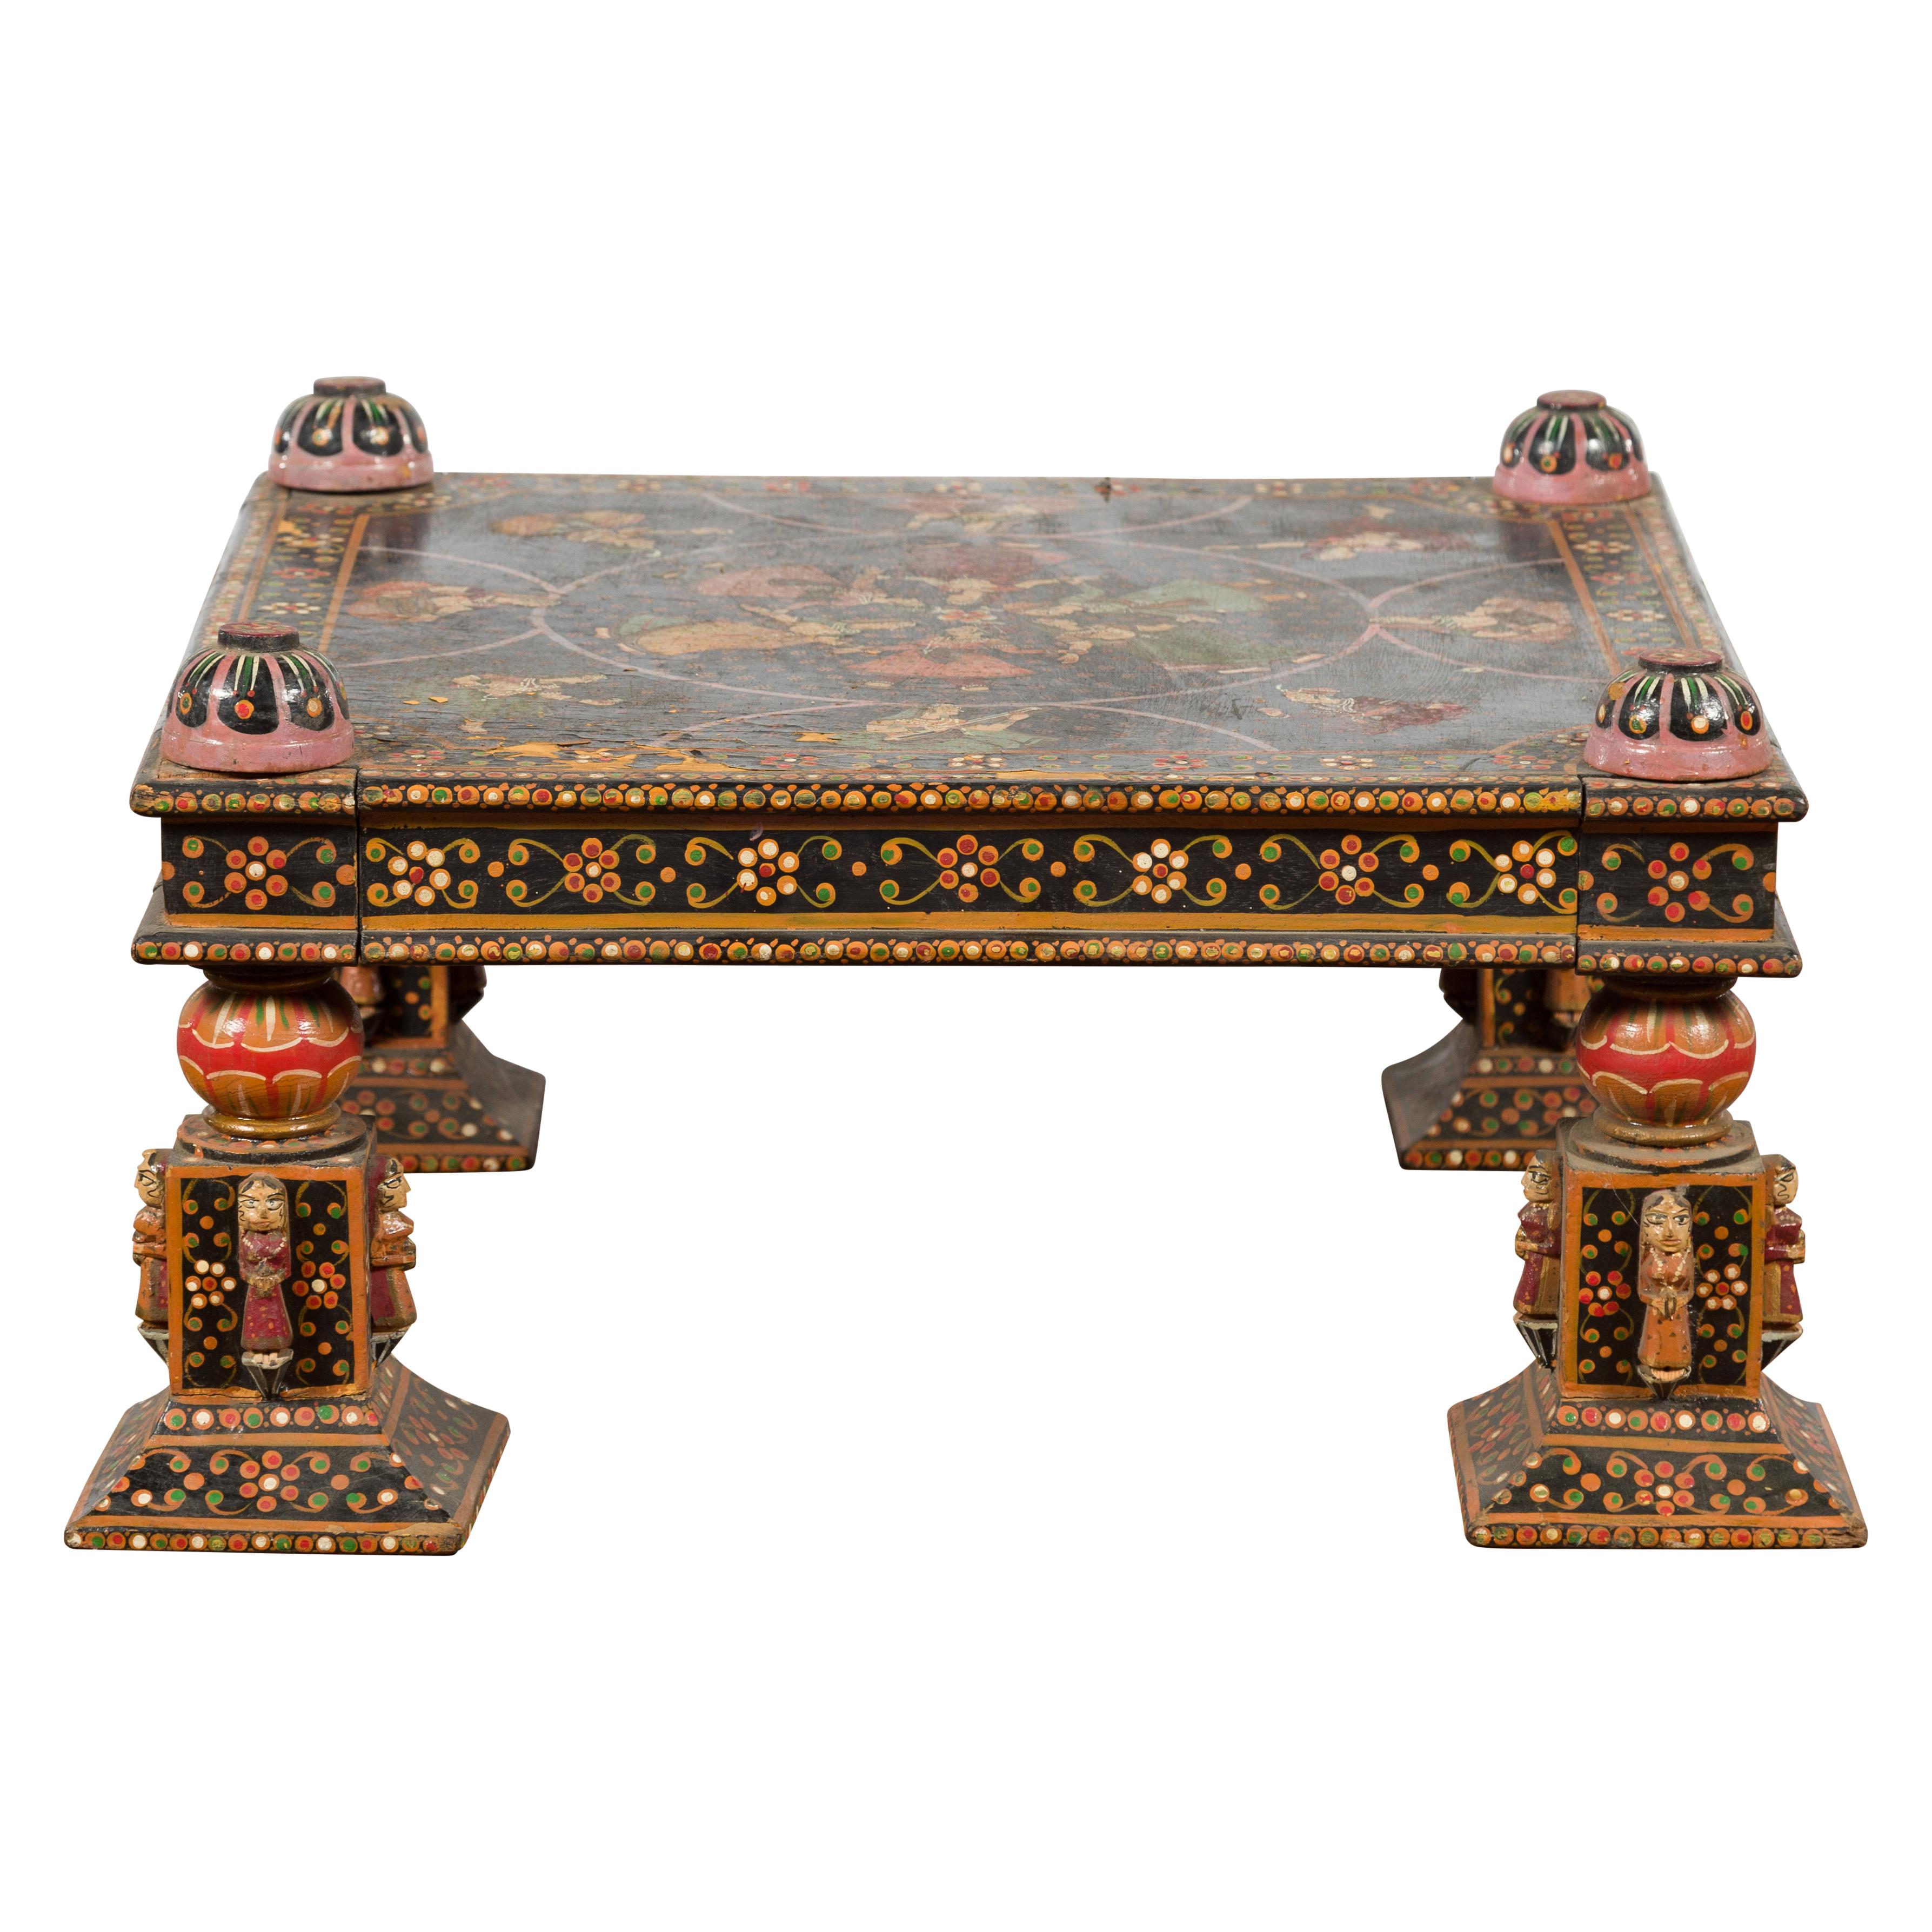 An Indian low coffee table from the 19th century, with hand-painted floral motifs and dancers. Created in India during the 19th century, this low coffee table features a square top adorned with dancers and musicians, sitting above a floral-themed